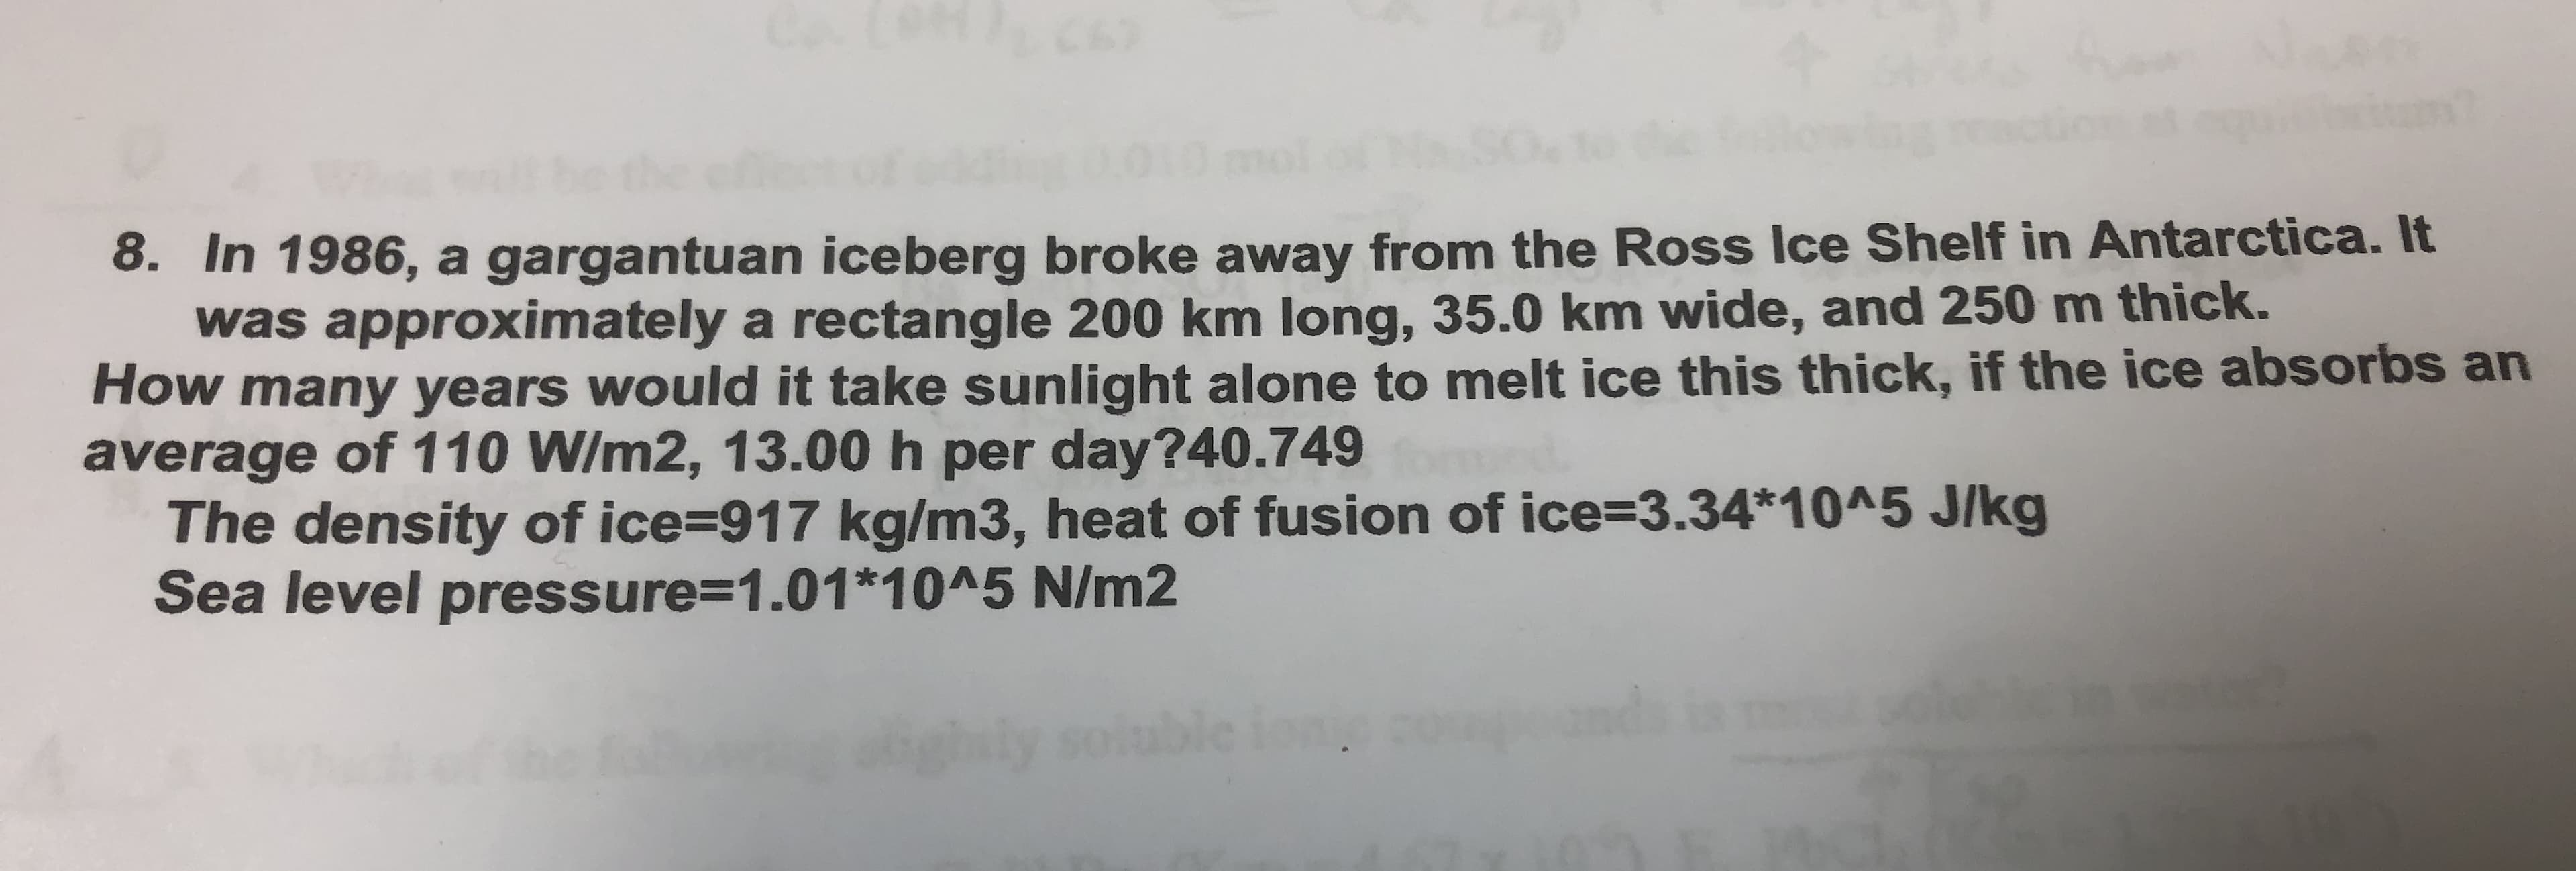 67
8. In 1986, a gargantuan iceberg broke away from the Ross Ice Shelf in Antarctica. It
was approximately a rectangle 200 km long, 35.0 km wide, and 250 m thick.
How many years would it take sunlight alone to melt ice this thick, if the ice absorbs an
average of 110 W/m2, 13.00 h per day?40.749
The density of ice=917 kg/m3, heat of fusion of ice%3D3.34*10^5 J/kg
Sea level pressure3D1.01*10^5 N/m2
